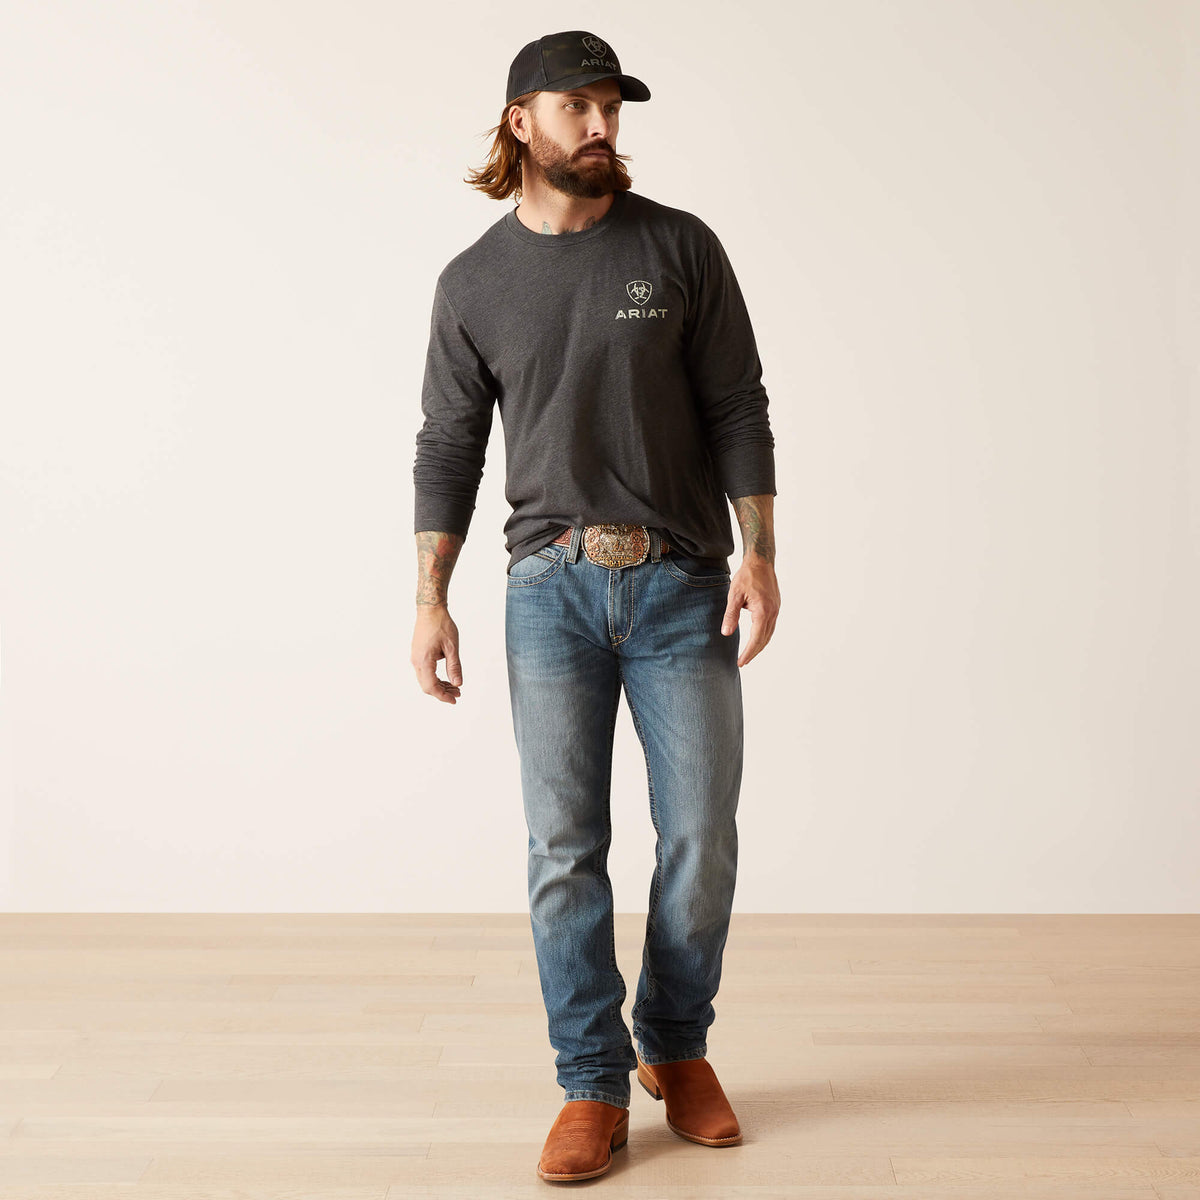 Ariat Men's Wooden Flag Long Sleeve T-Shirt in Charcoal Heather